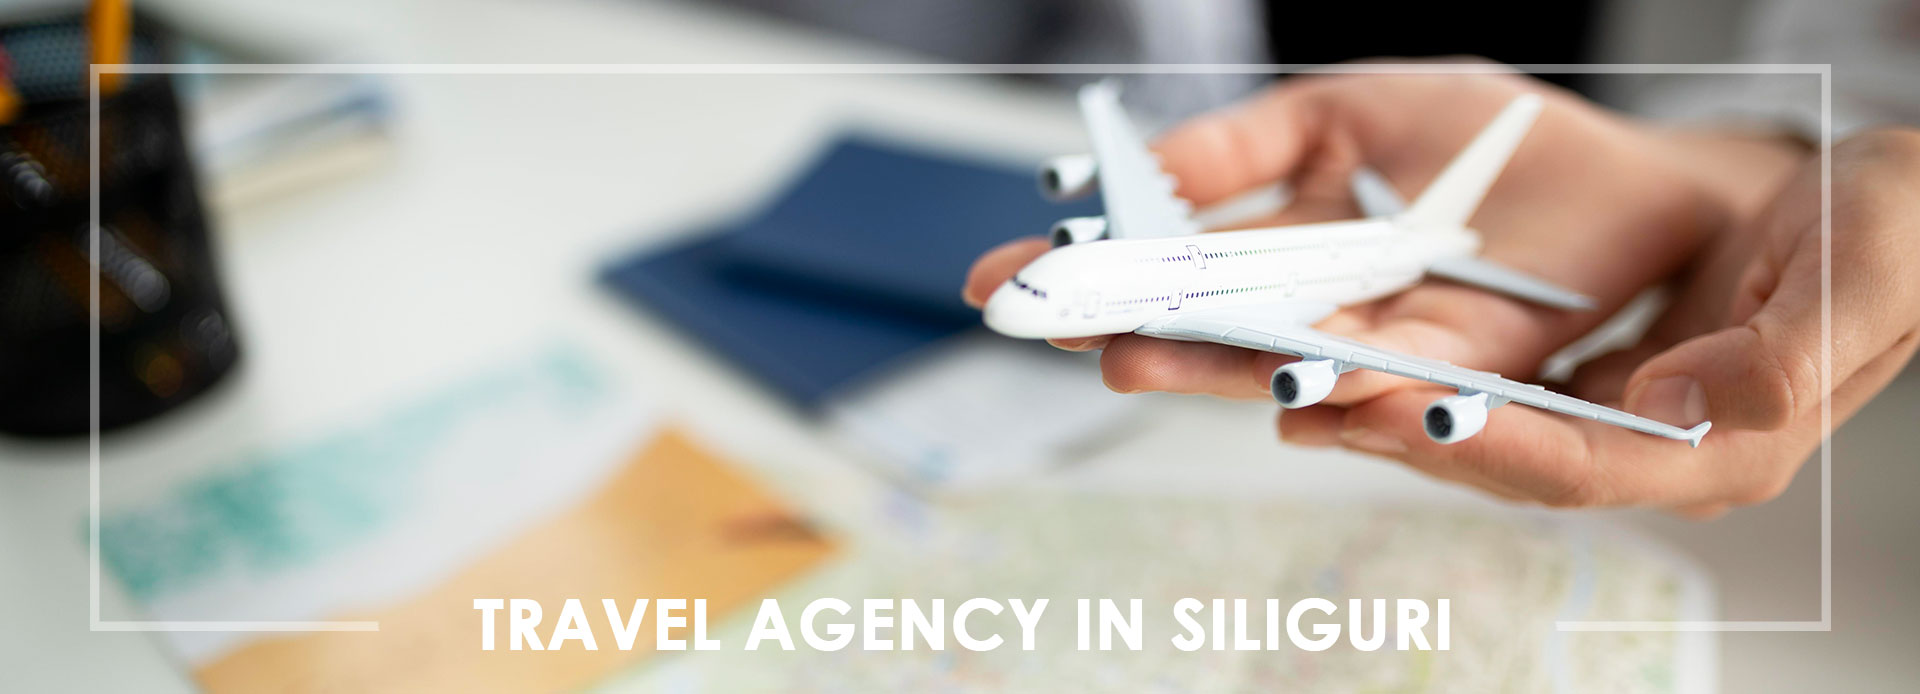  Tour Operator & Travel Agency in Siliguri | Best Travel Agents near Me